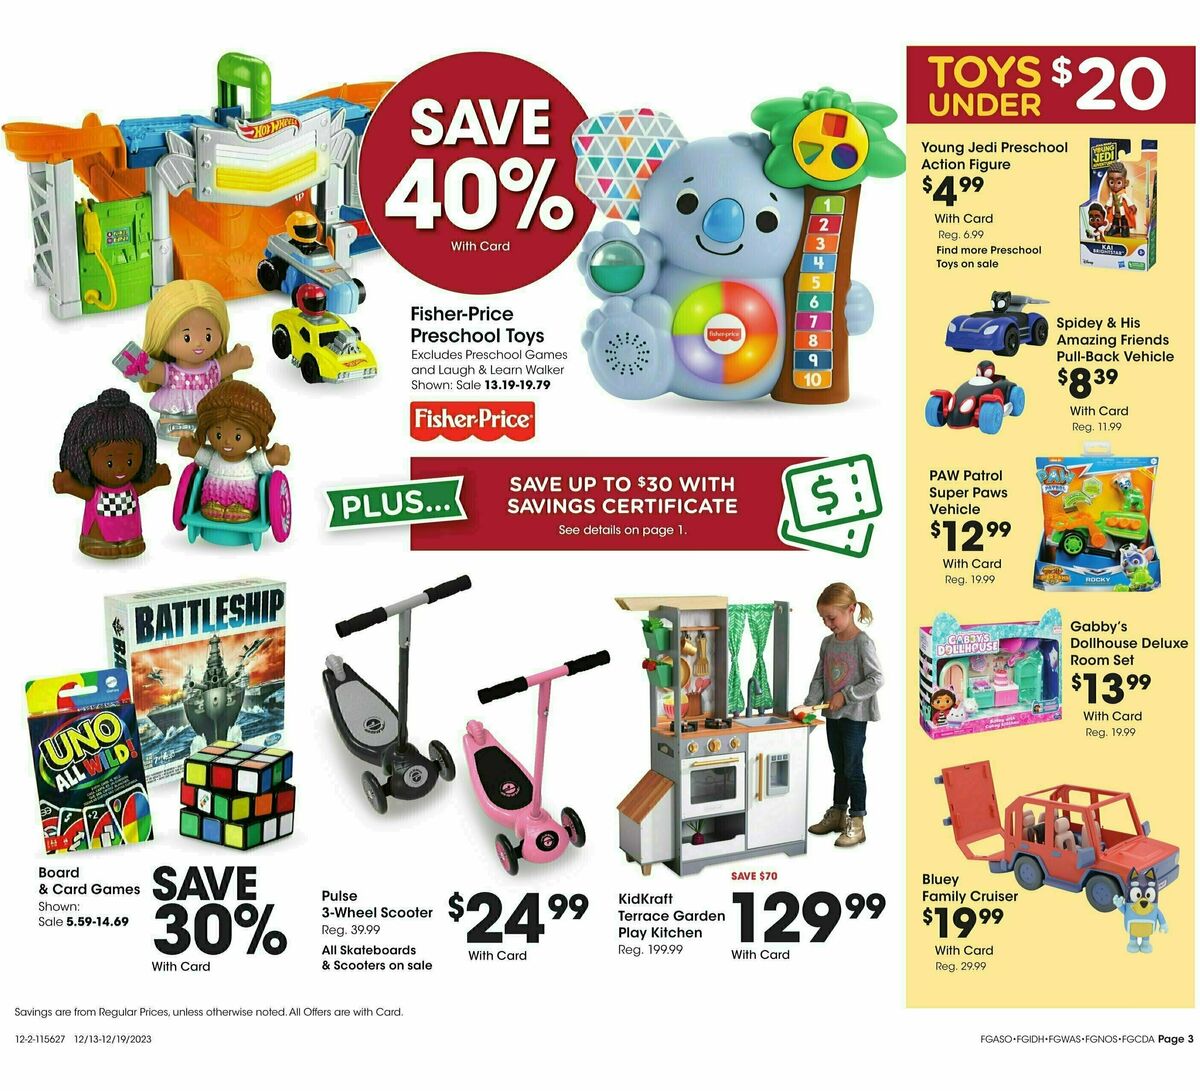 Fred Meyer General Merchandise Weekly Ad from December 13